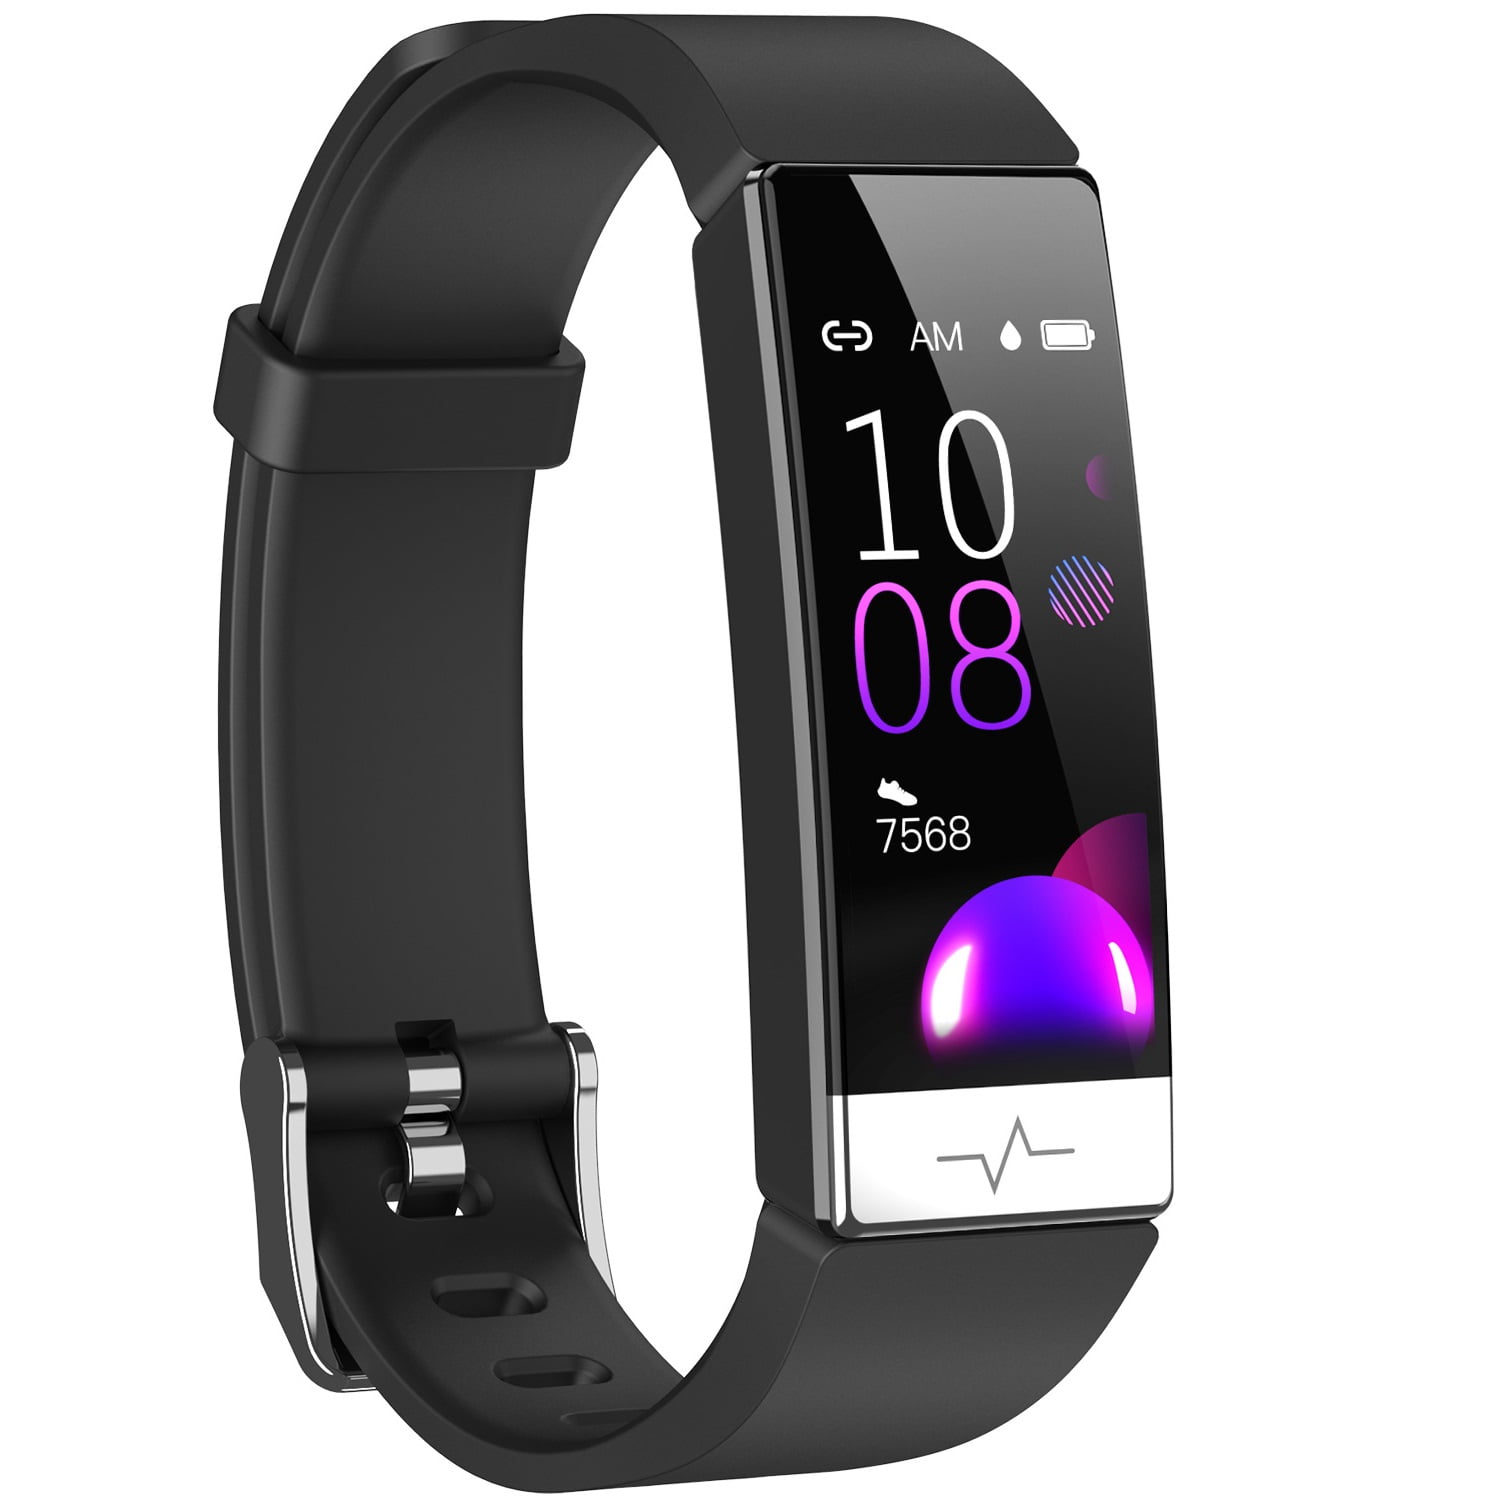 Axball Vital Fit Track, Vital Fit Track Smart Watch,Fitness Tracker with  Blood Pressure Blood Oxygen…See more Axball Vital Fit Track, Vital Fit  Track